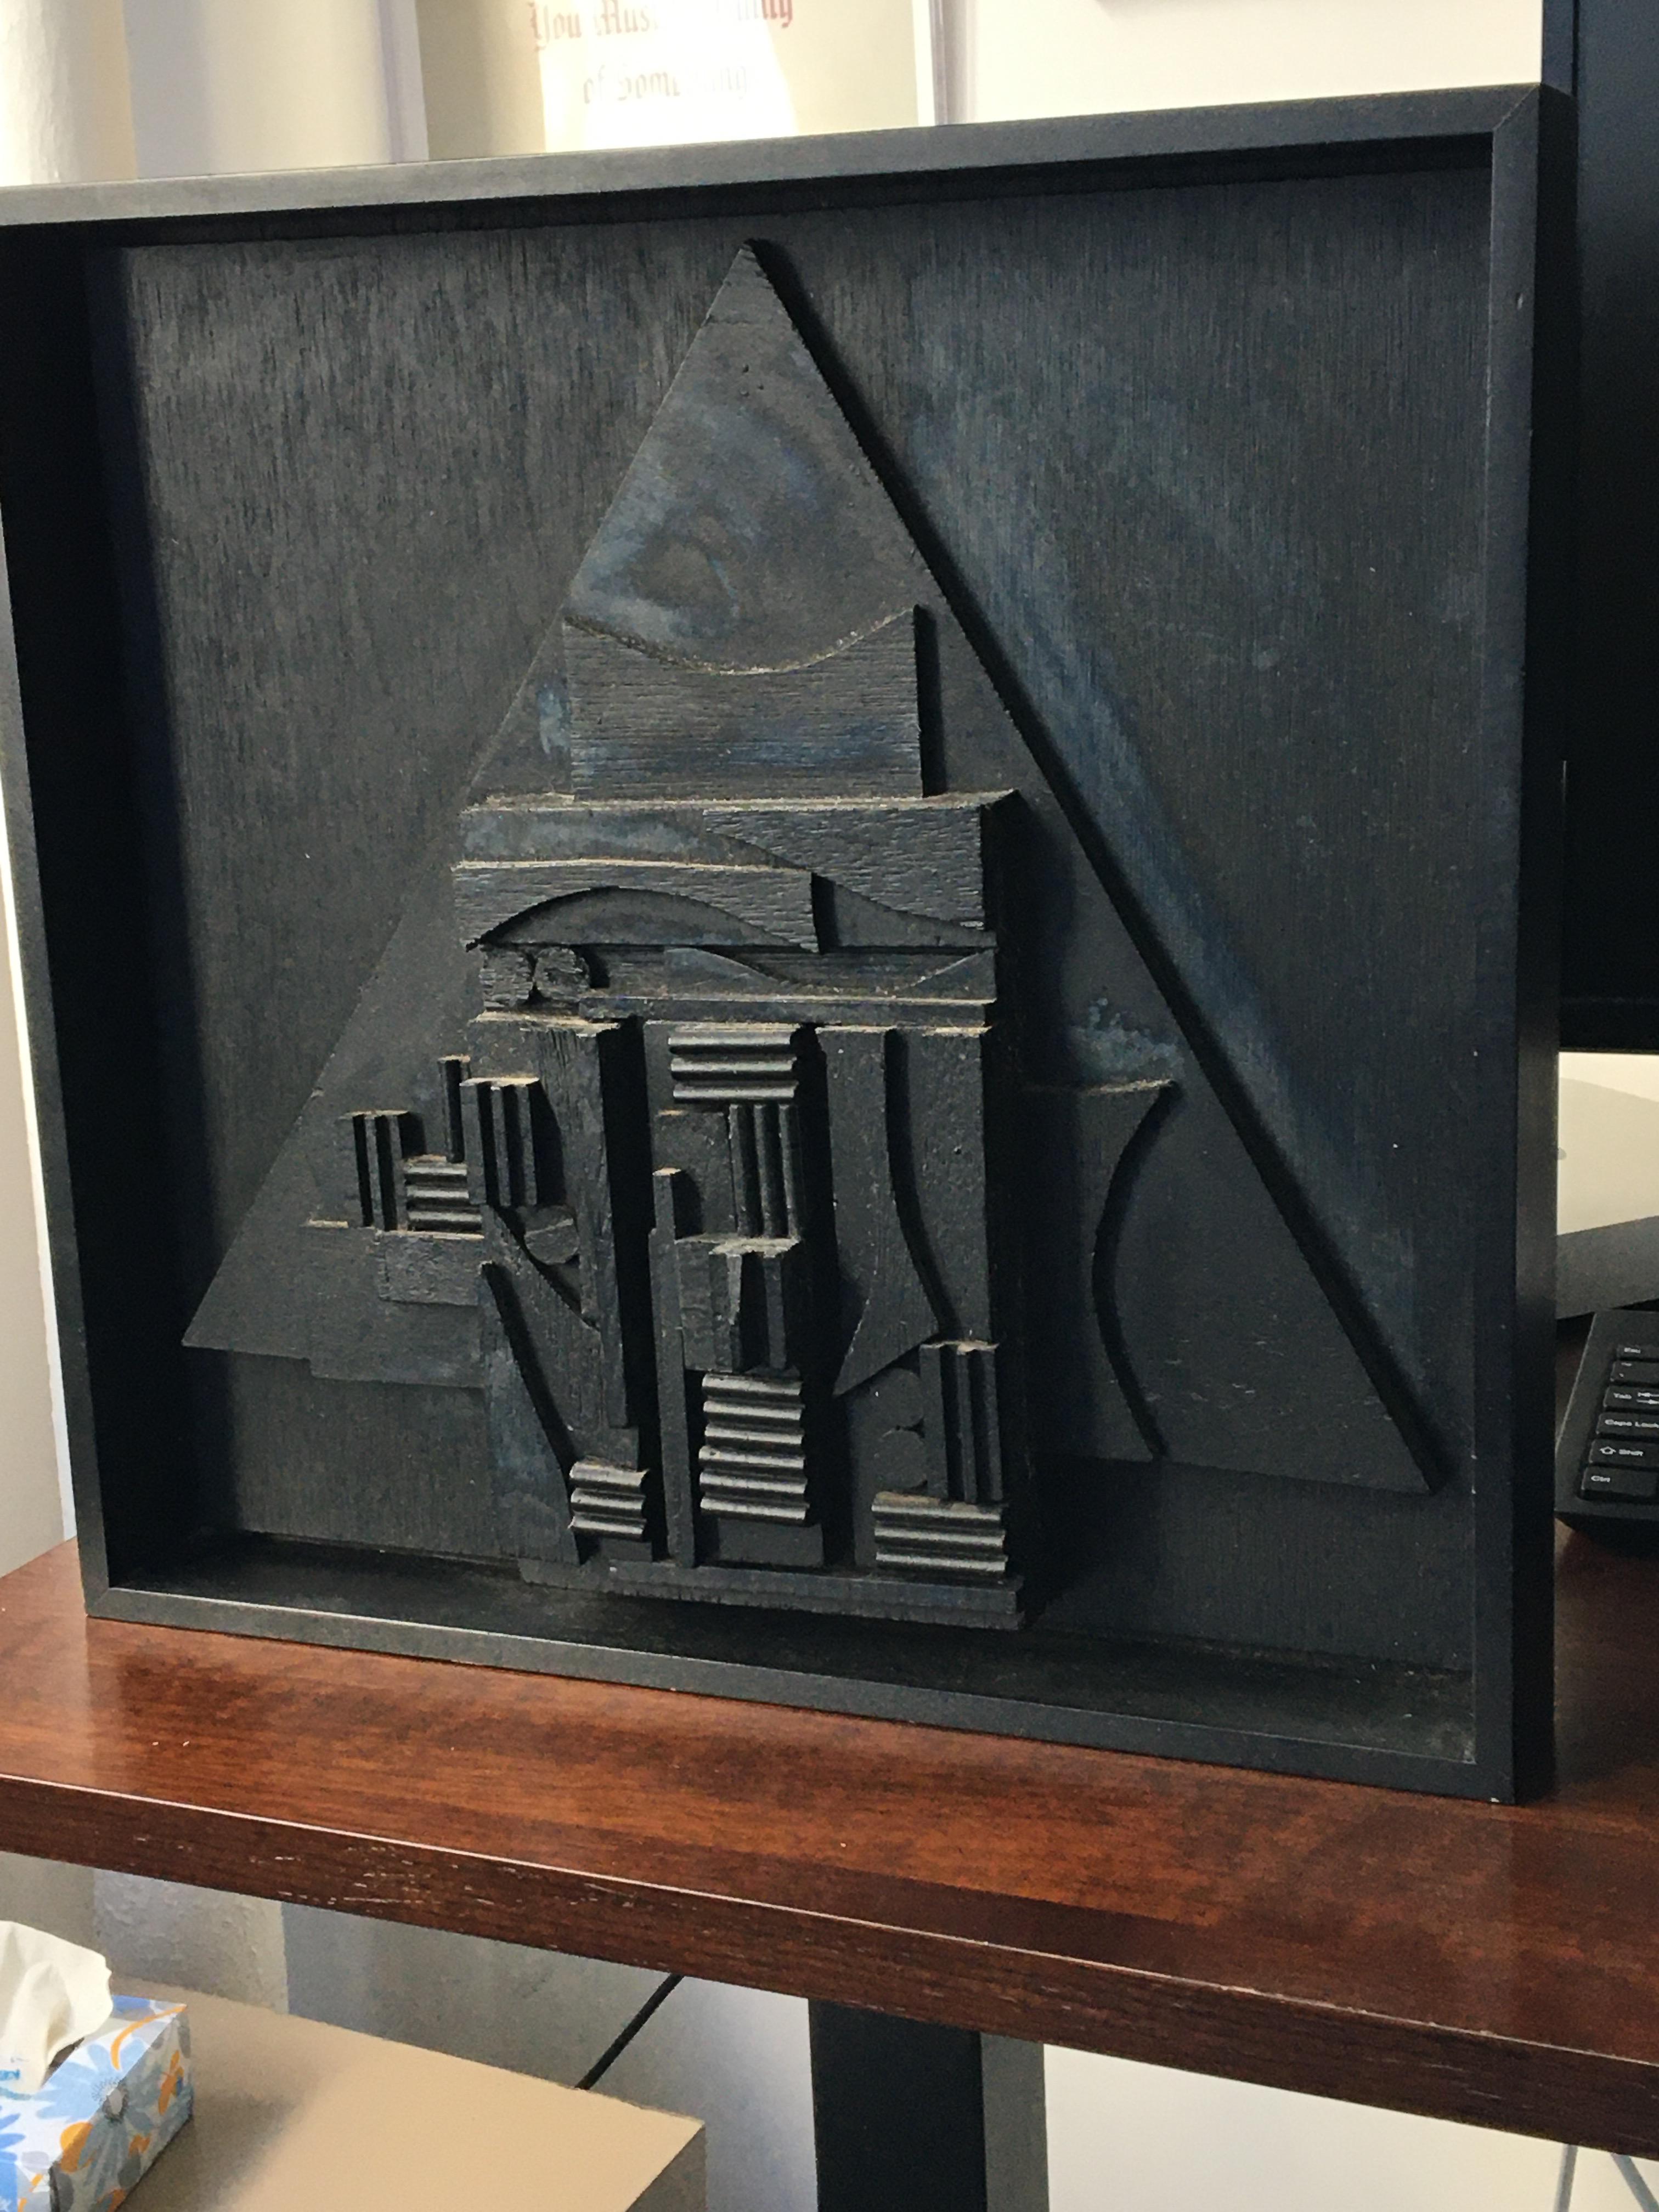 The Louise Nevelson Sculpture for the American Book Award 4